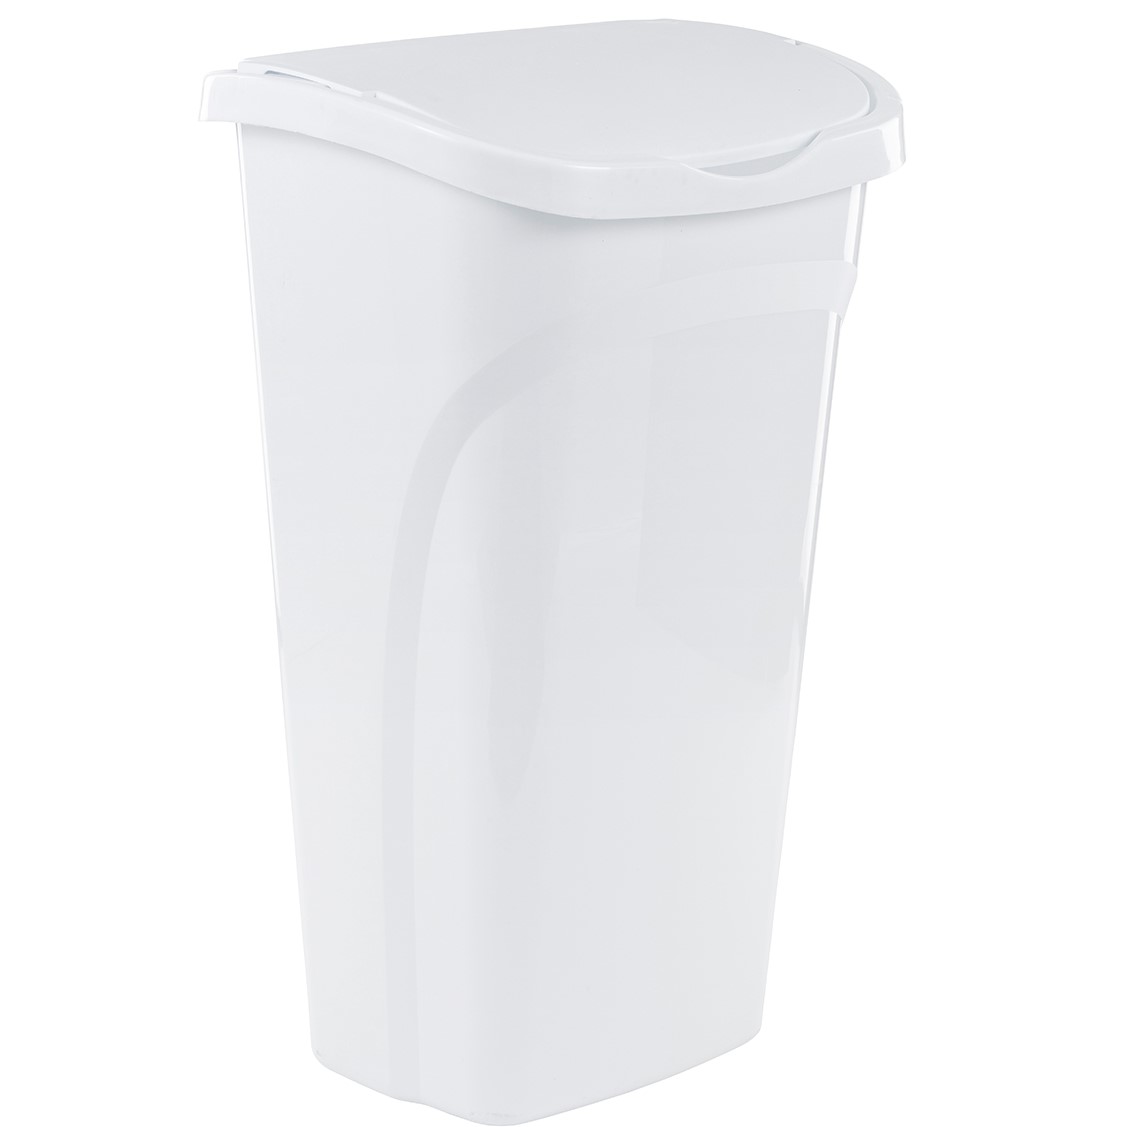 ECOSOLUTION 32 Gal. Wheeled Outdoor Garbage Can with Lid, ECO